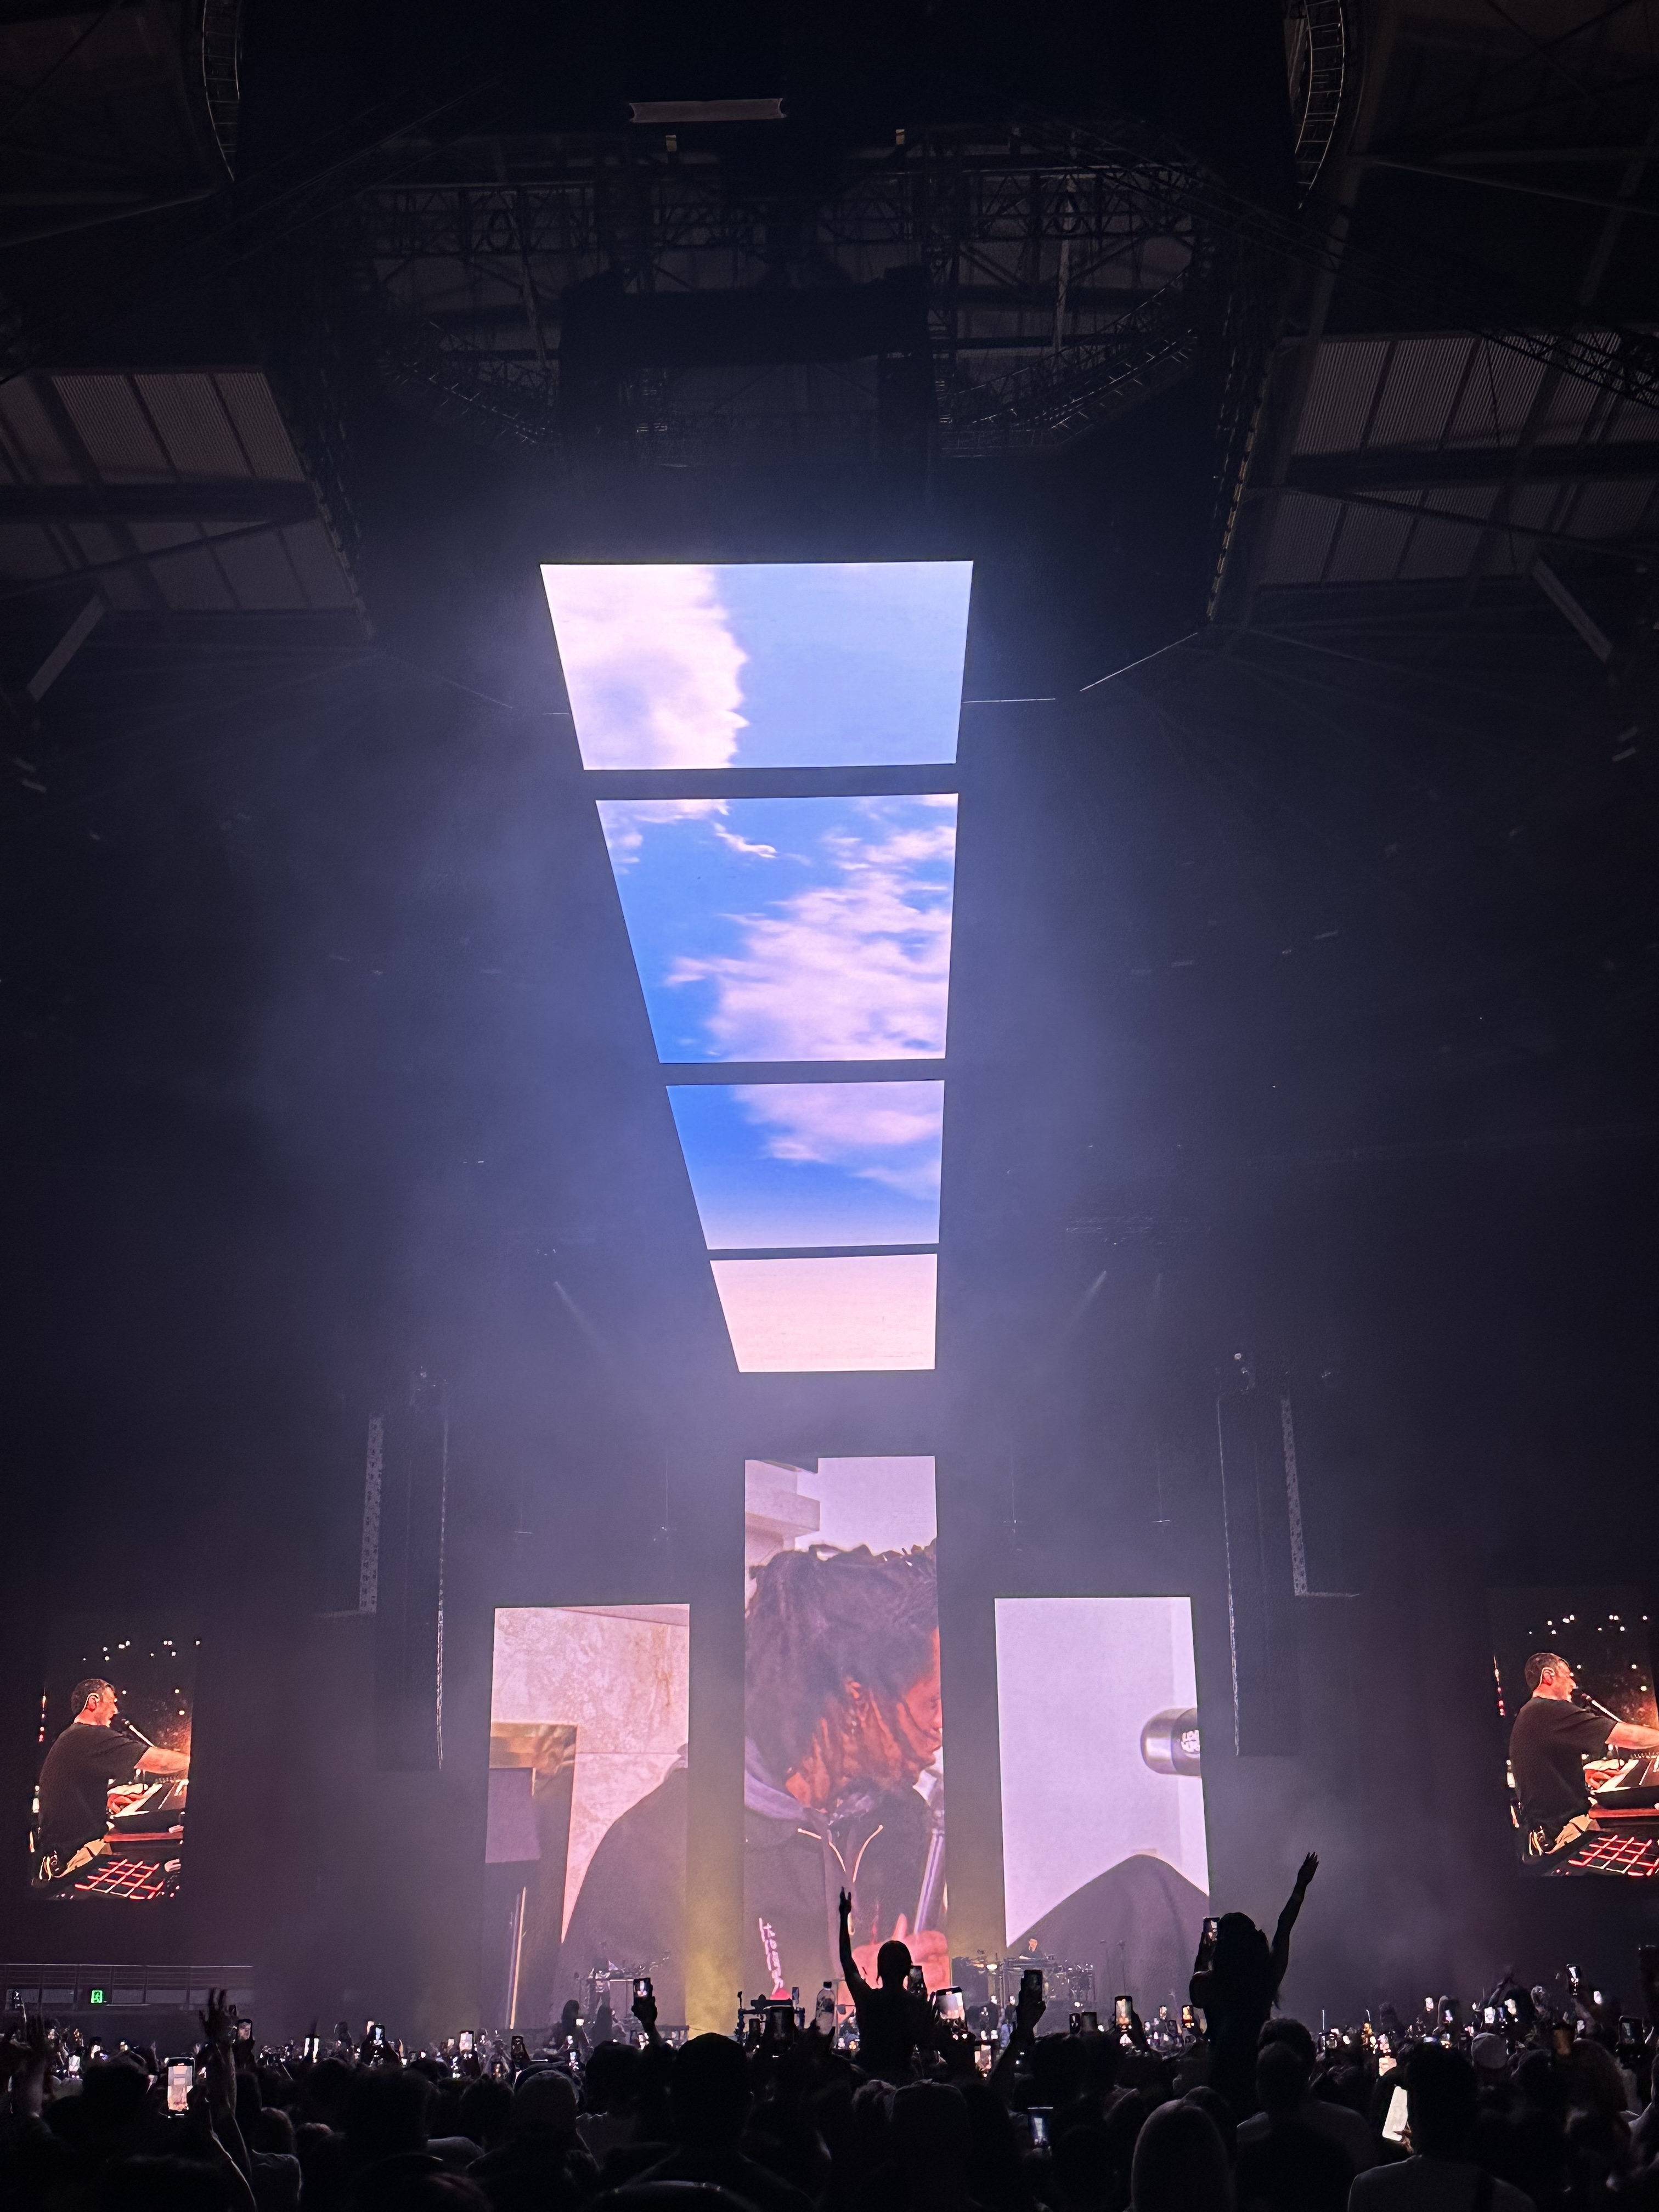 Concert stage with large screens showing sky and nature, audience with hands up in silhouette